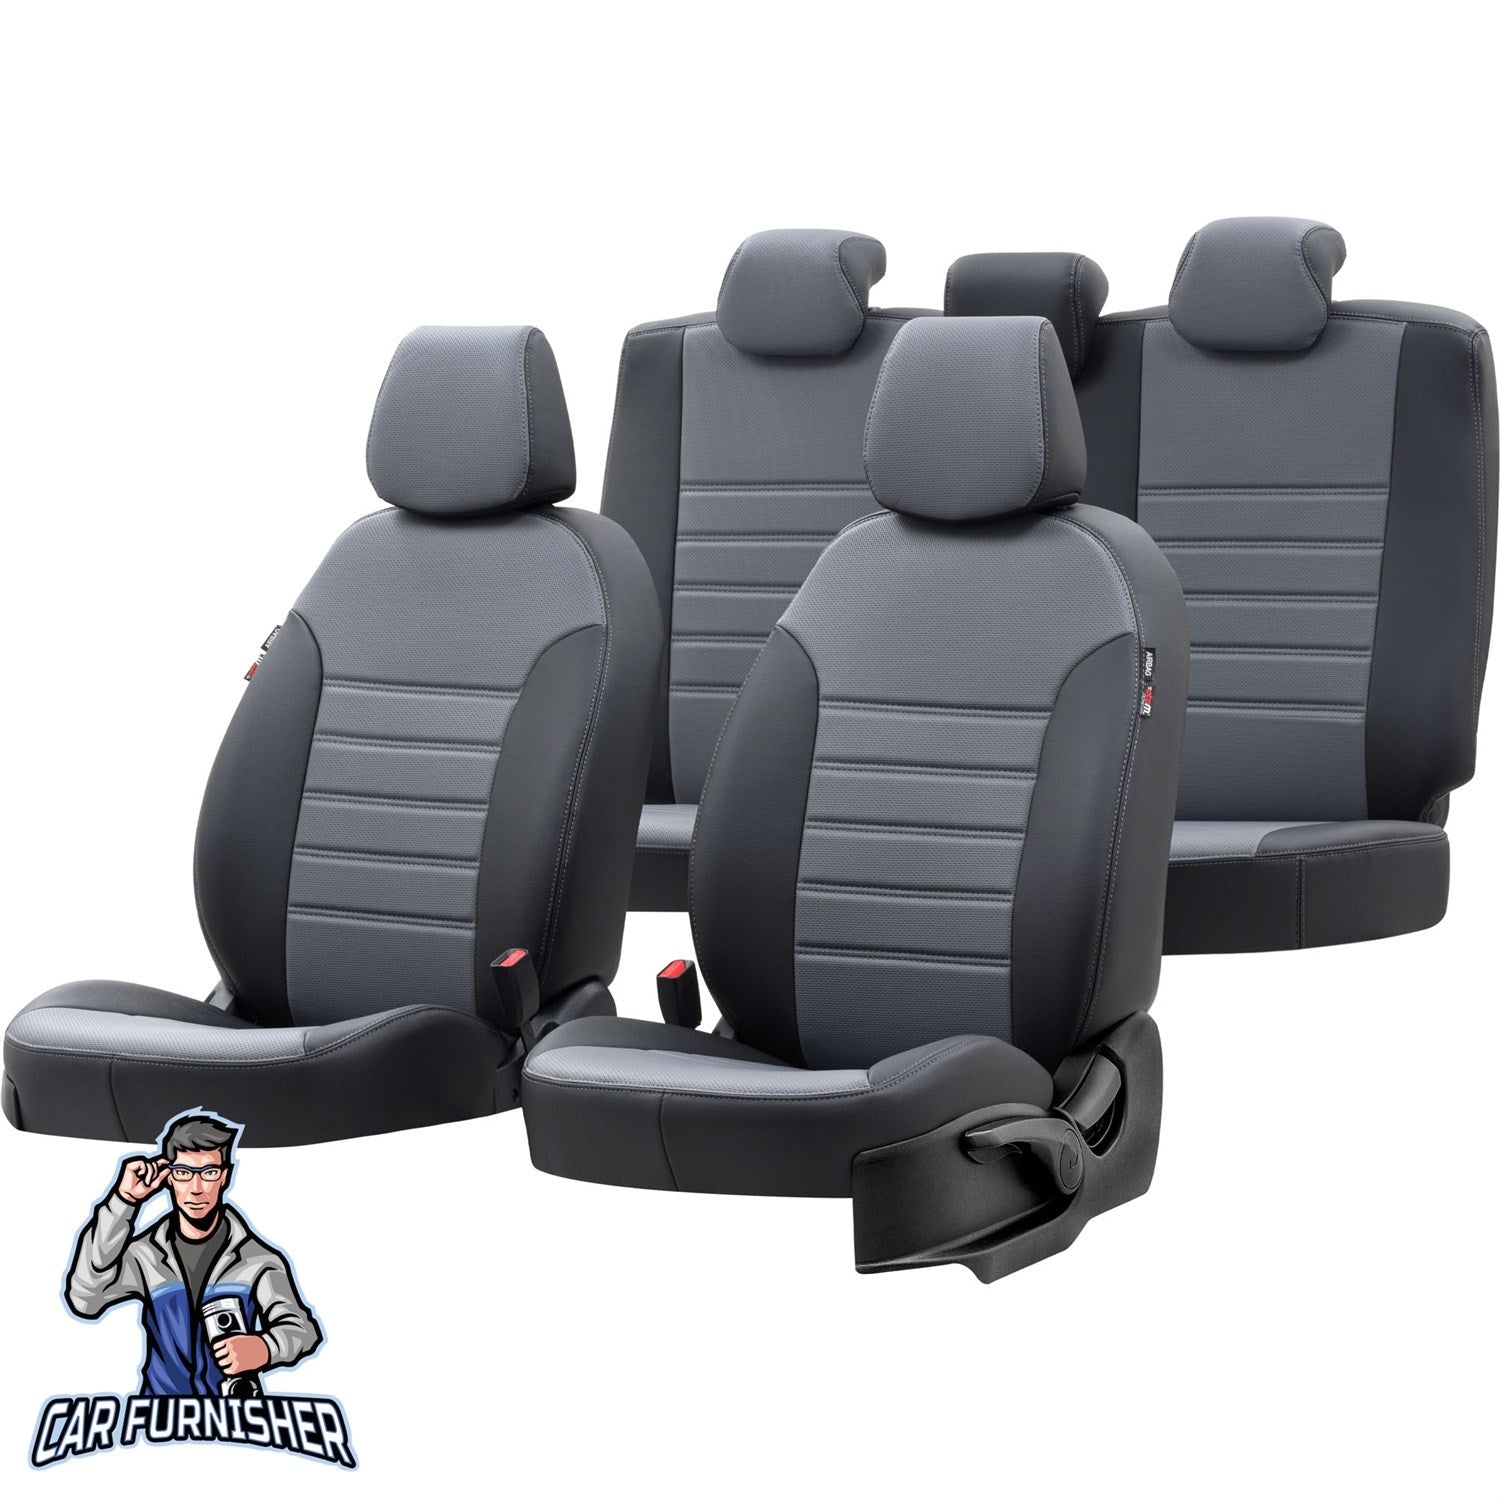 Chevrolet Tahoe Seat Covers New York Leather Design Smoked Black Leather